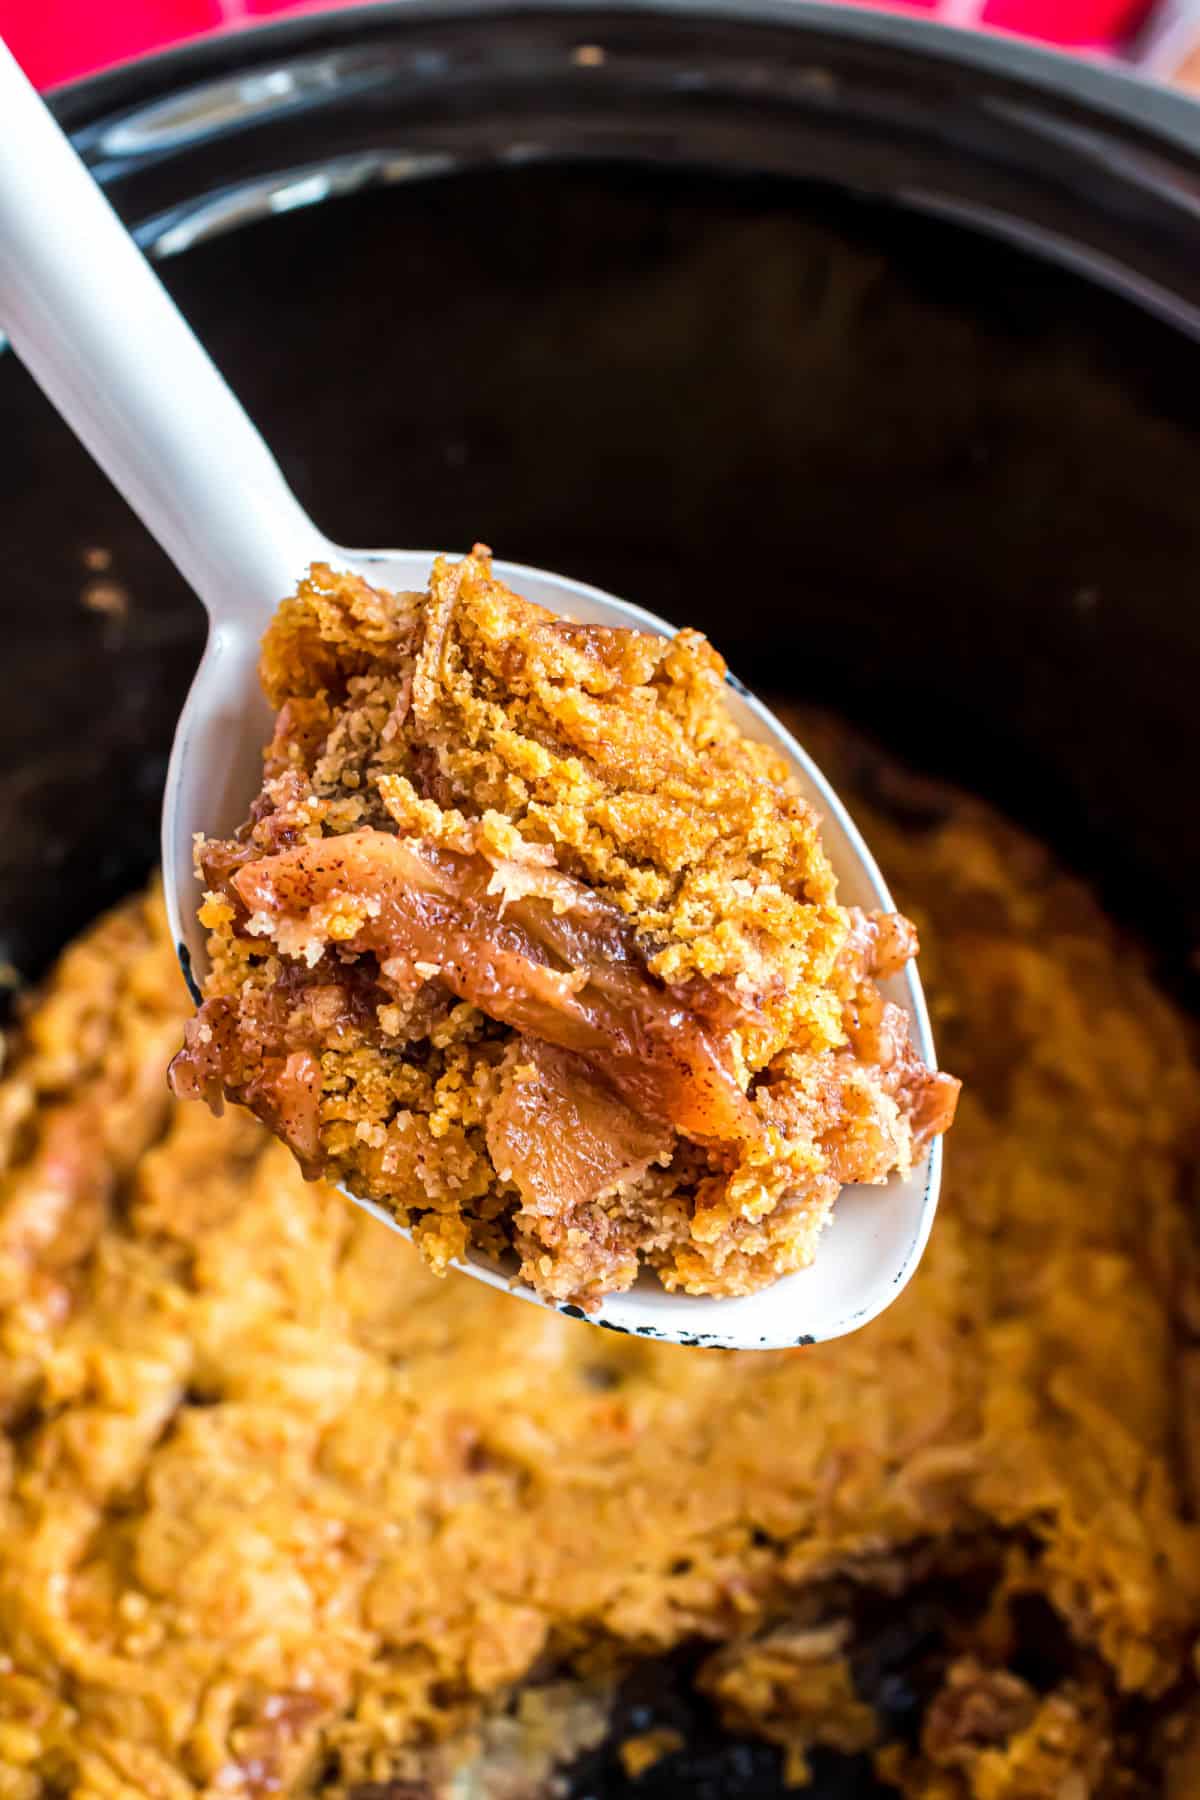 Spoonful of apple cake from the slow cooker.